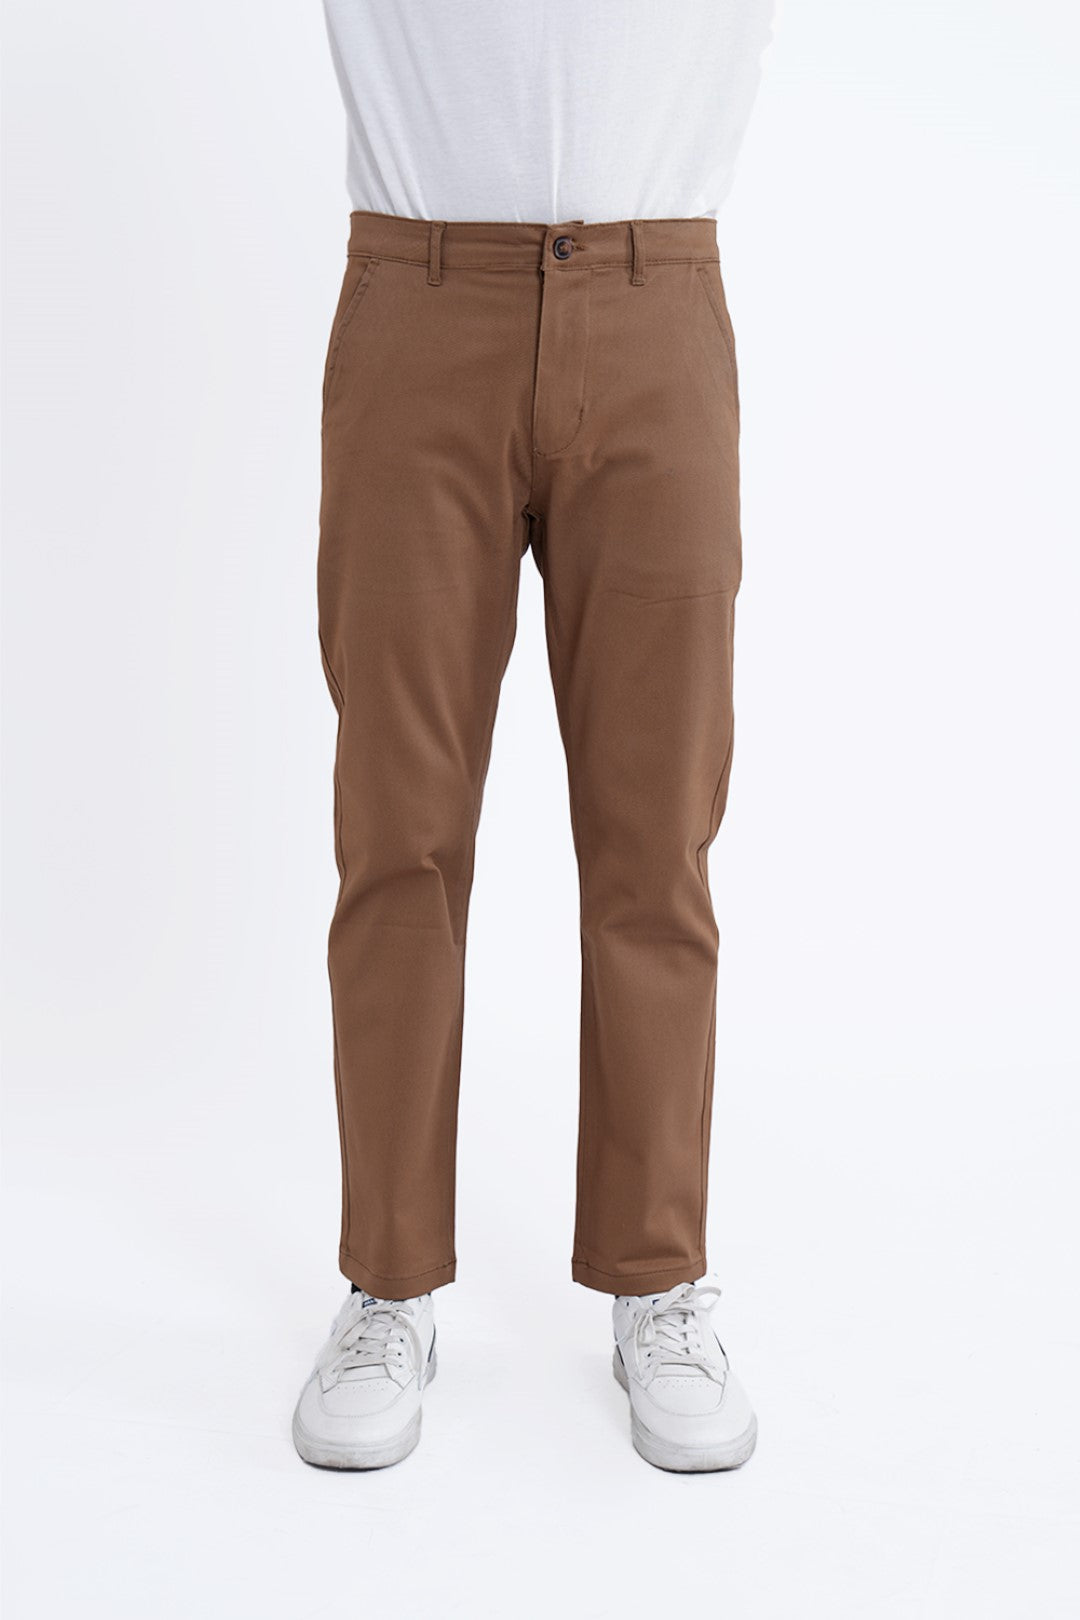 Smart Fit Camel Chino Pant RTCS240228-CML